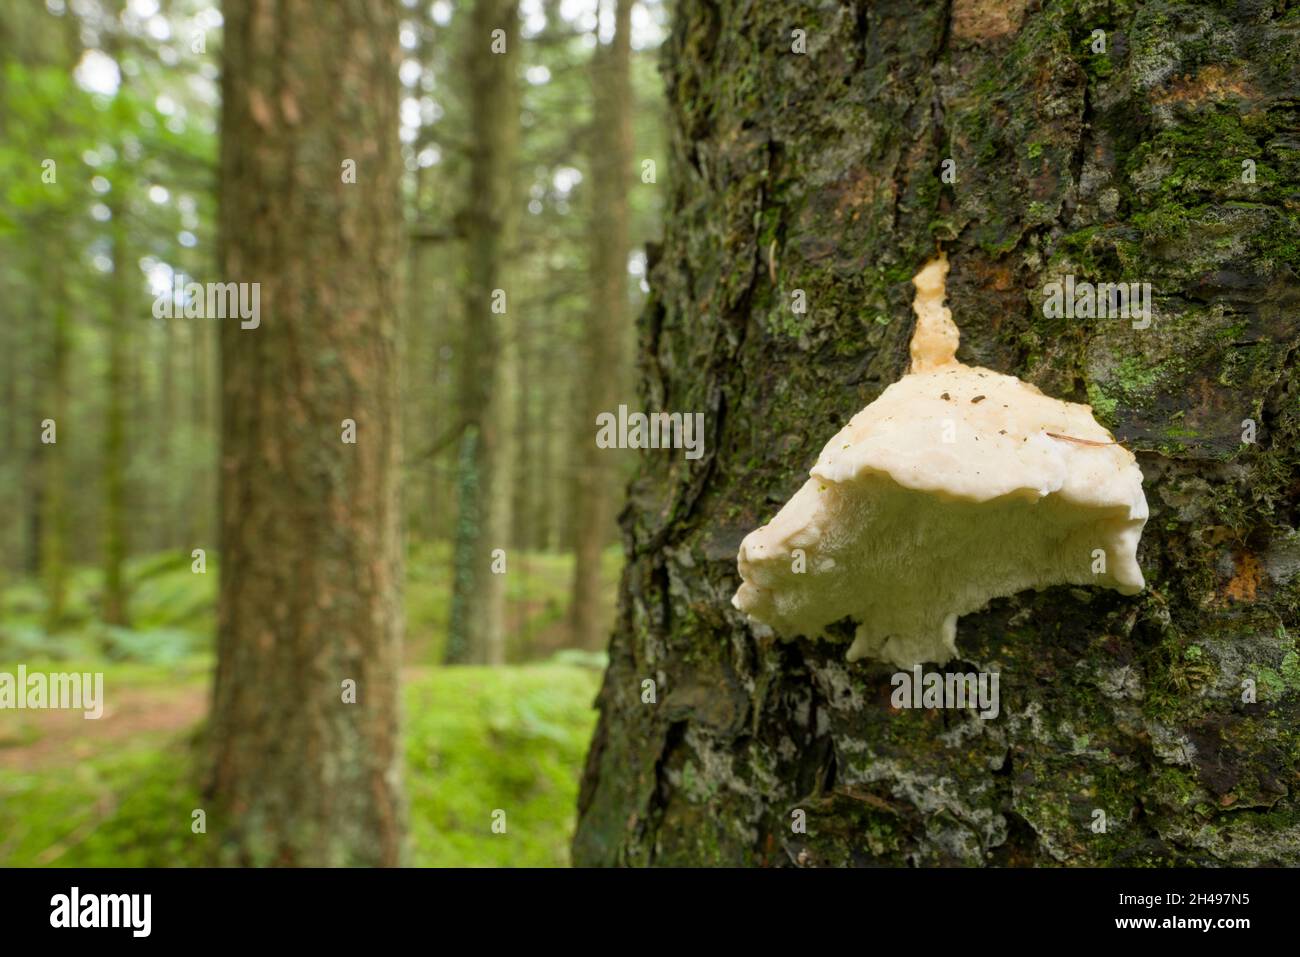 Bitter Bracket fungus (Postia stiptica) on a conifer tree in a coniferous woodland in the Mendip Hills, Somerset, England. Stock Photo